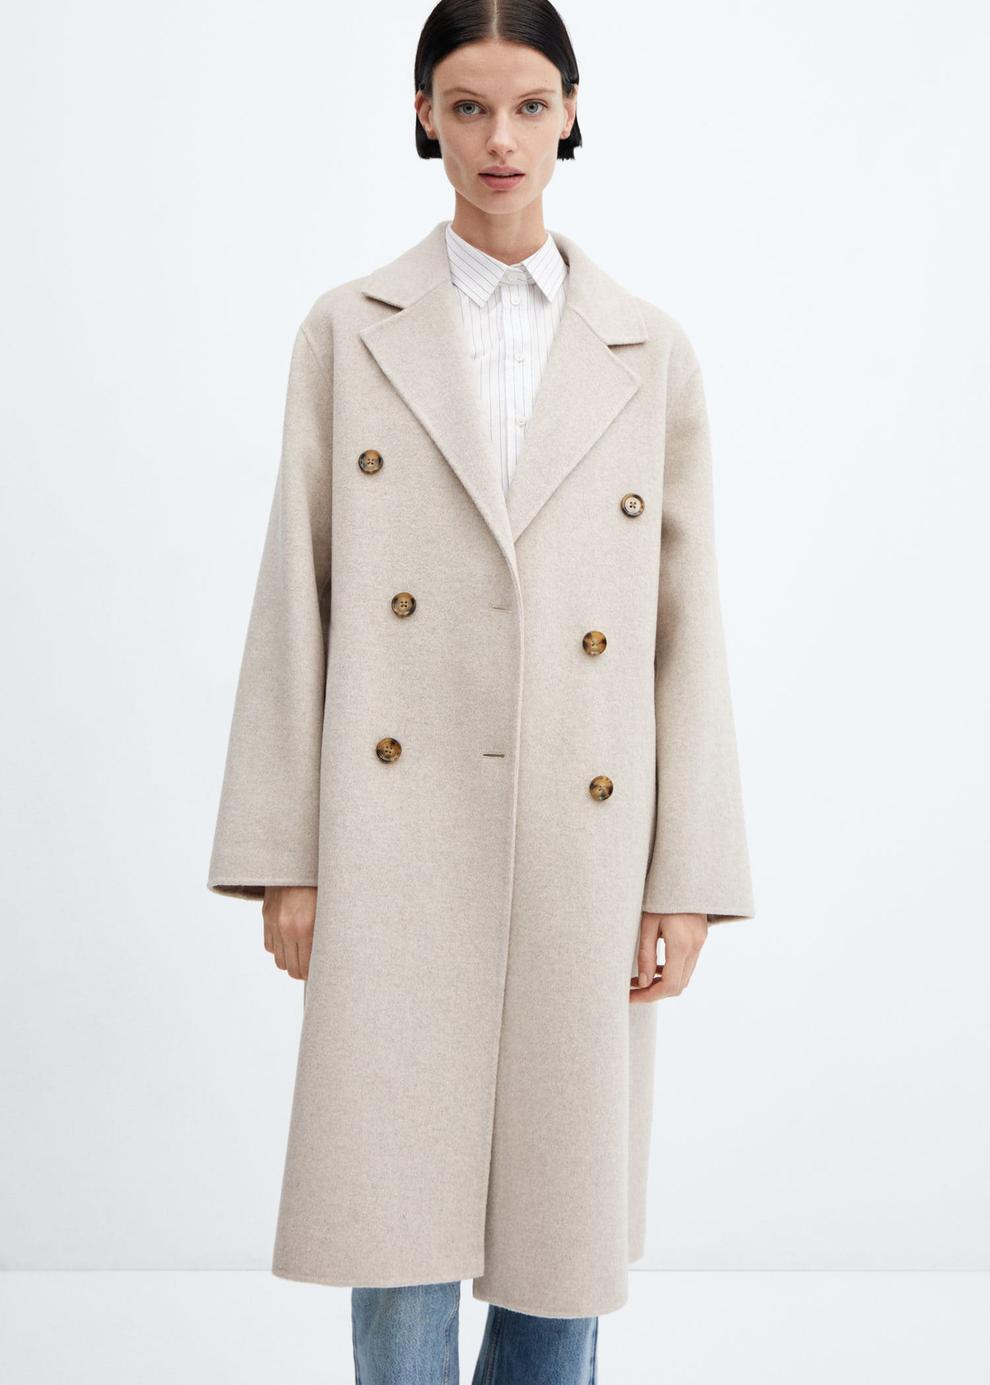 Handmade oversized wool coat offers at $199.99 in Mango